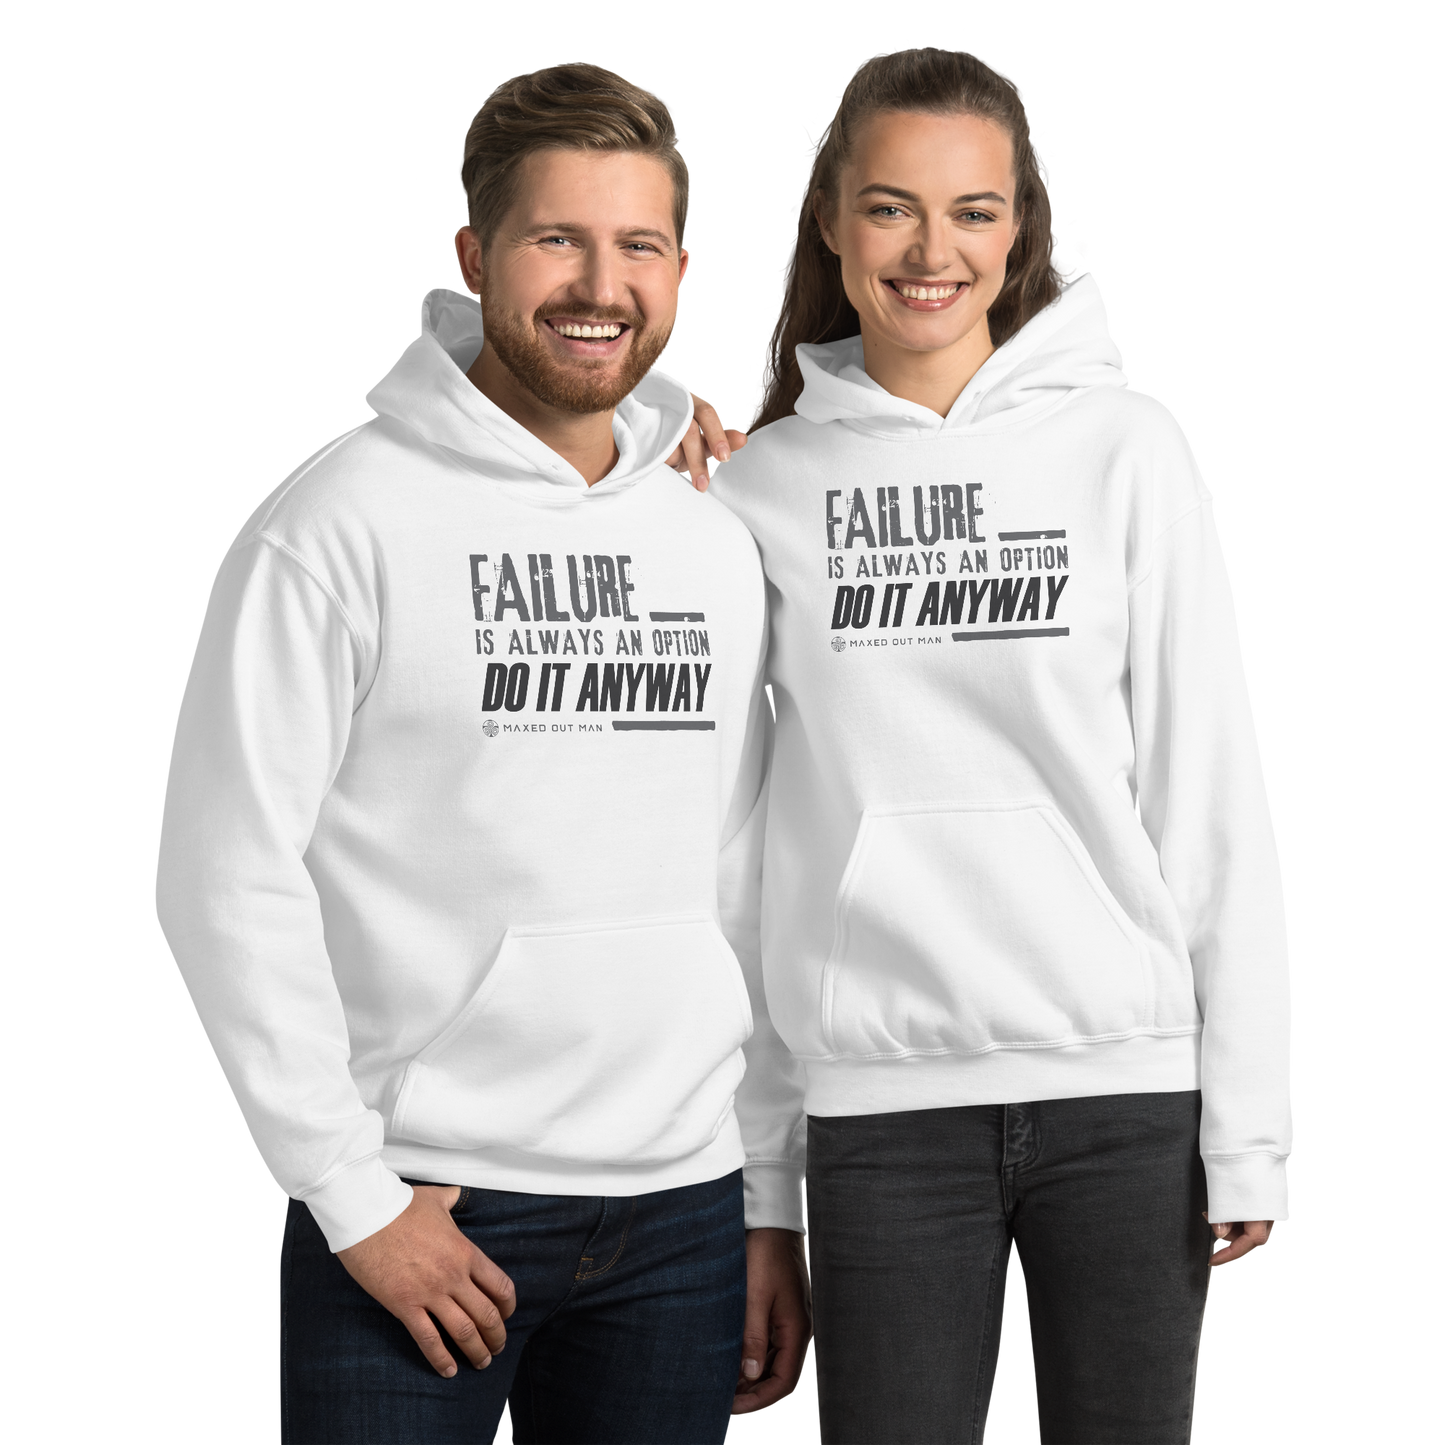 Failure is Always an Option Unisex Hoodie - Lighter Colors